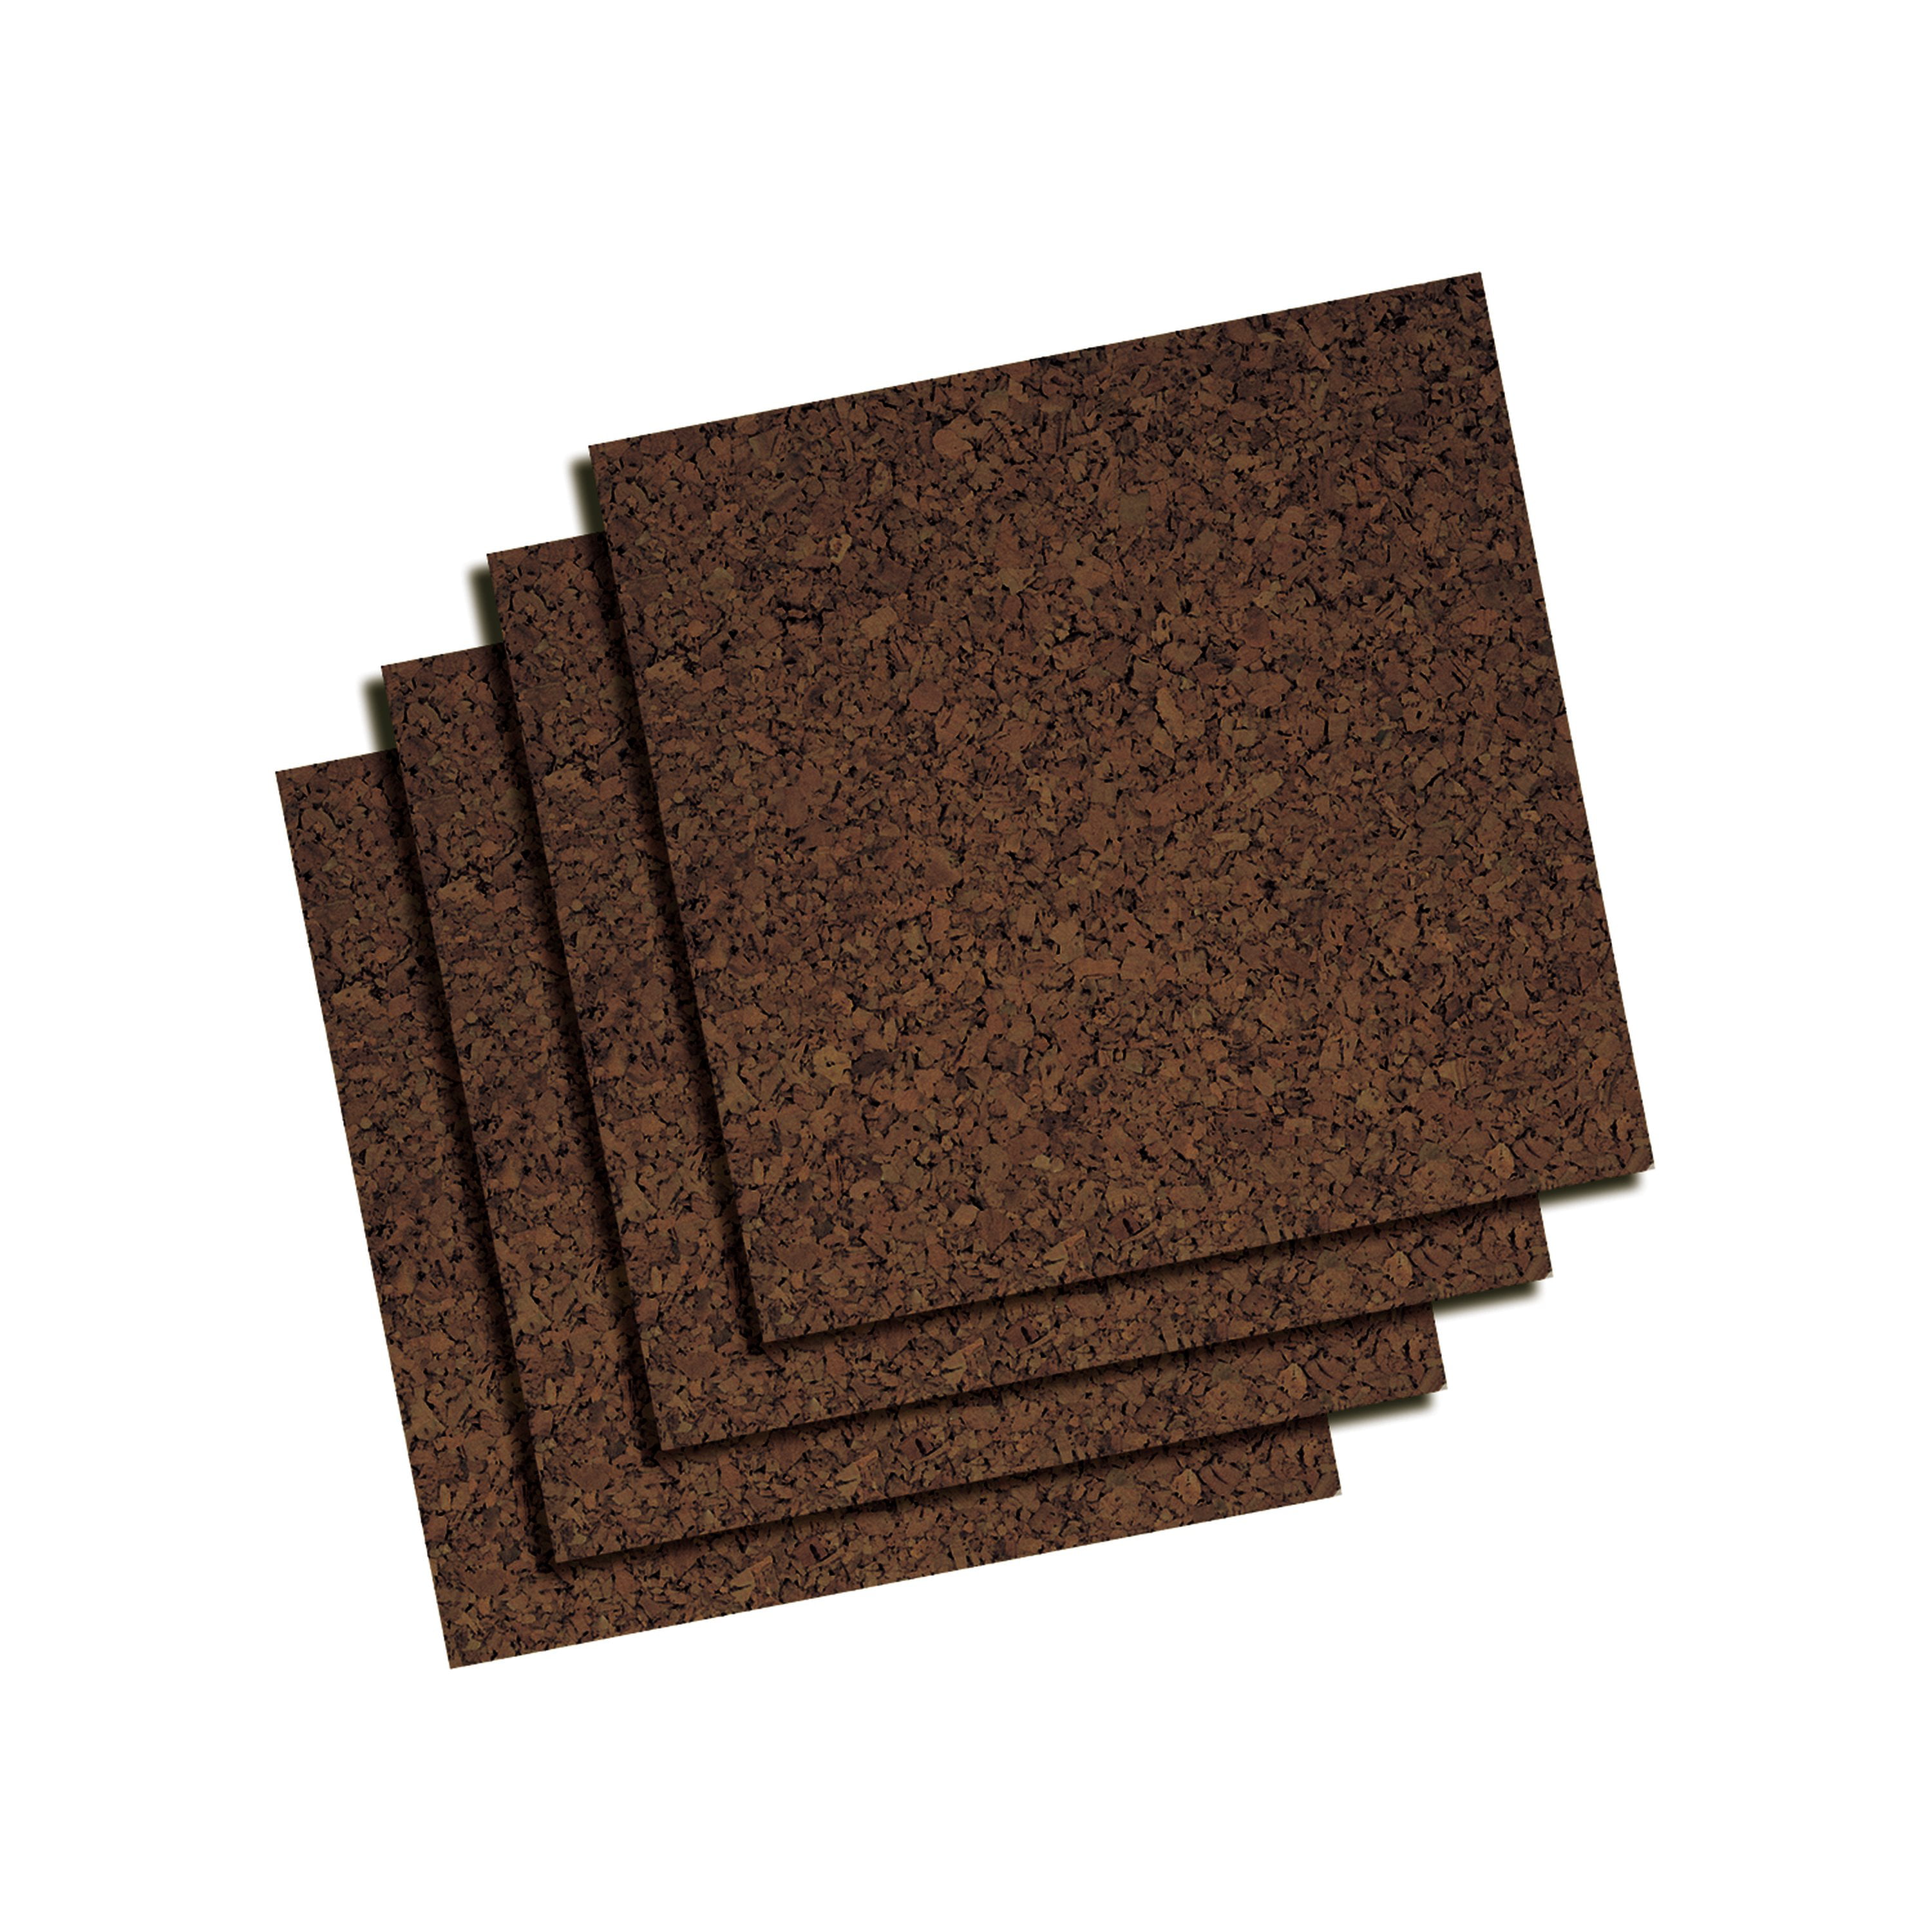 12x12 Inch Square Foam Cork Board Tiles w/ Self Adhesive Backing 1/2 Inch Thick 